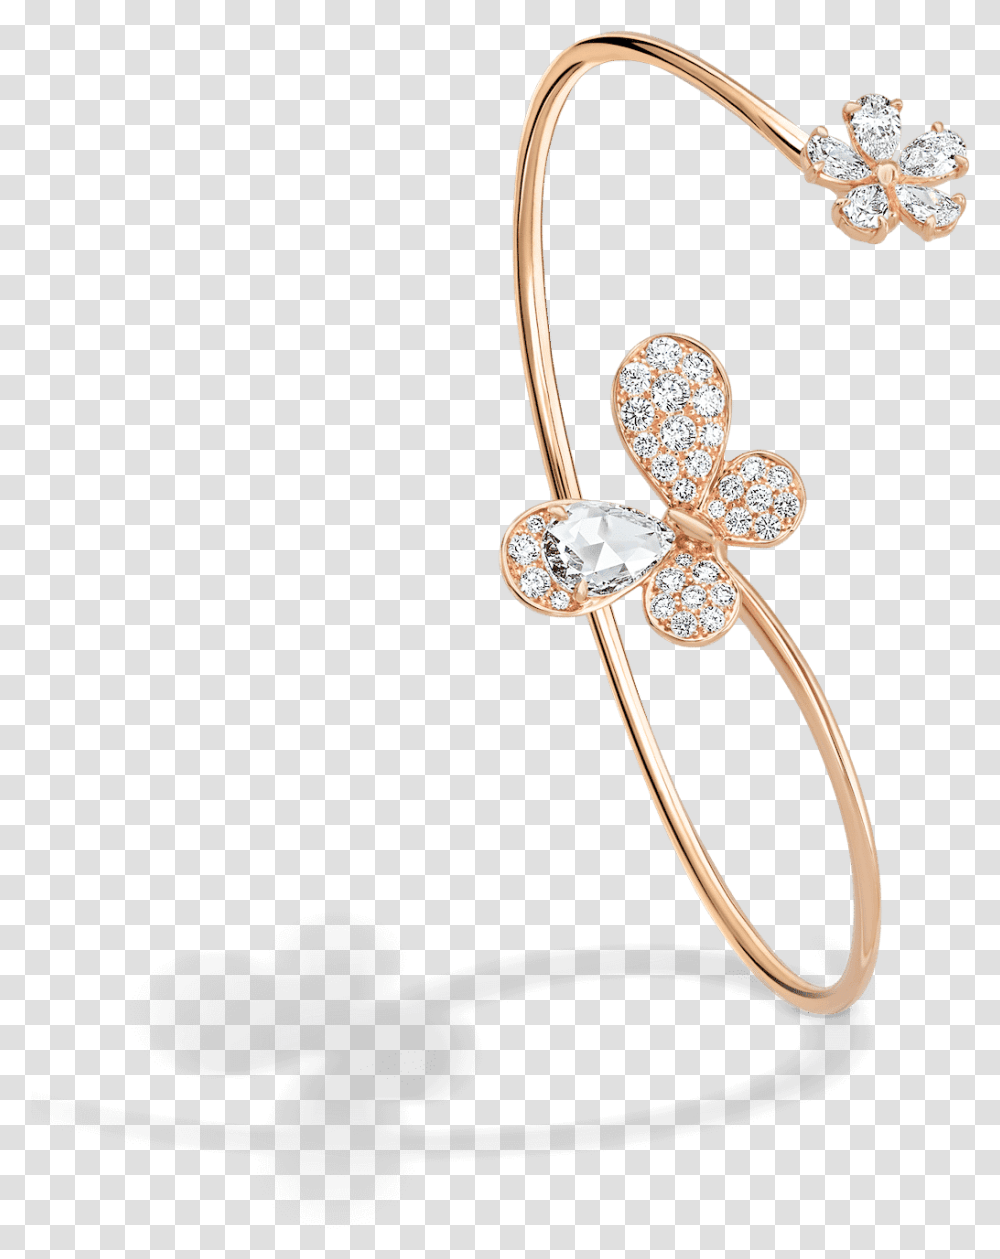 Px 08 005 002 02 F1 Pixie Bangle Pre Engagement Ring, Jewelry, Accessories, Accessory, Earring Transparent Png